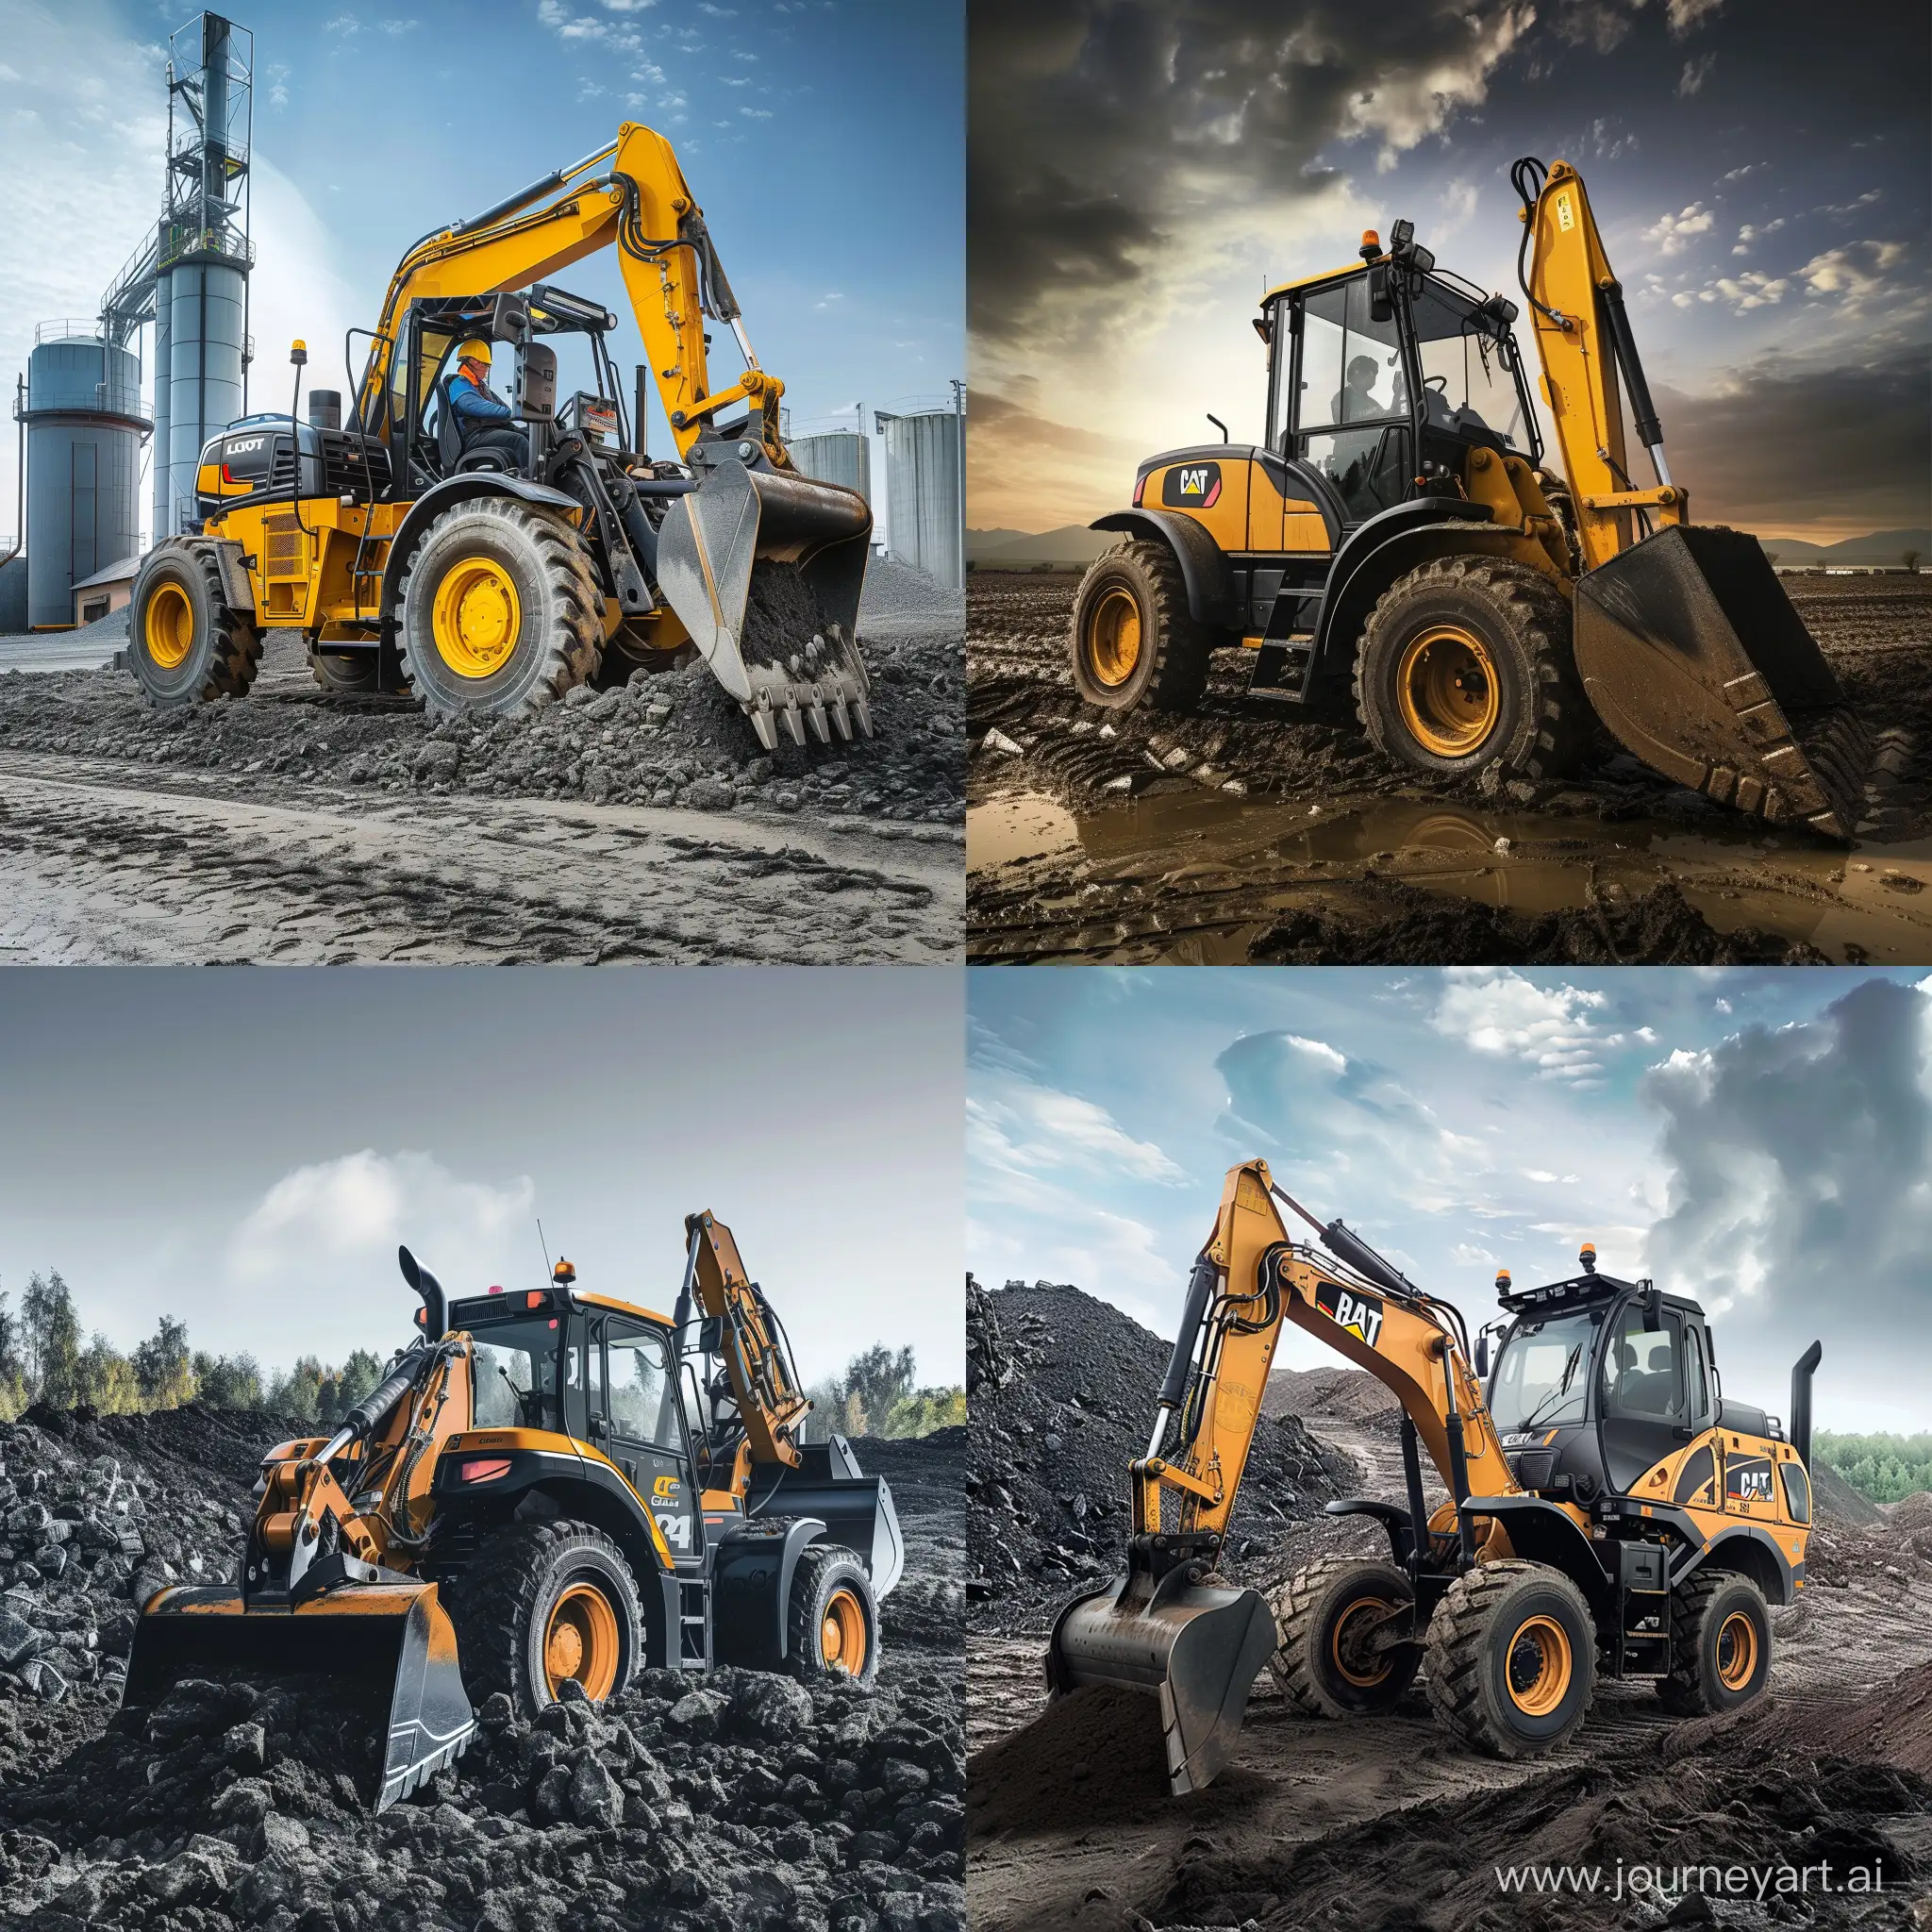 Powerful-Backhoe-Loader-Working-on-Construction-Site